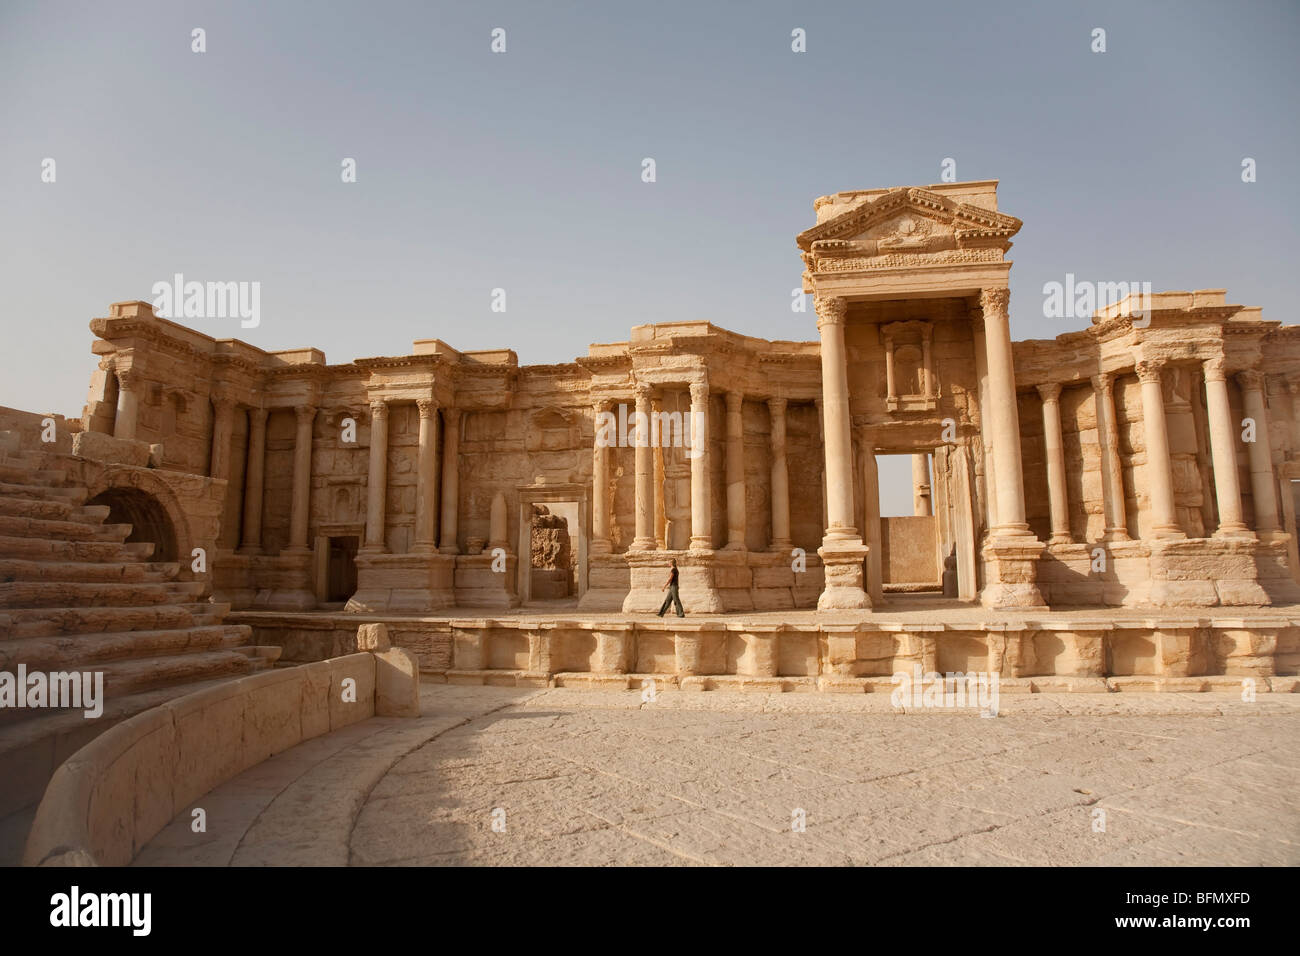 Syria, Palmyra. The ancient (but recently restored) amphitheatre formed a part of Queen Zenobia's Roman city at Palmyra.(MR) Stock Photo